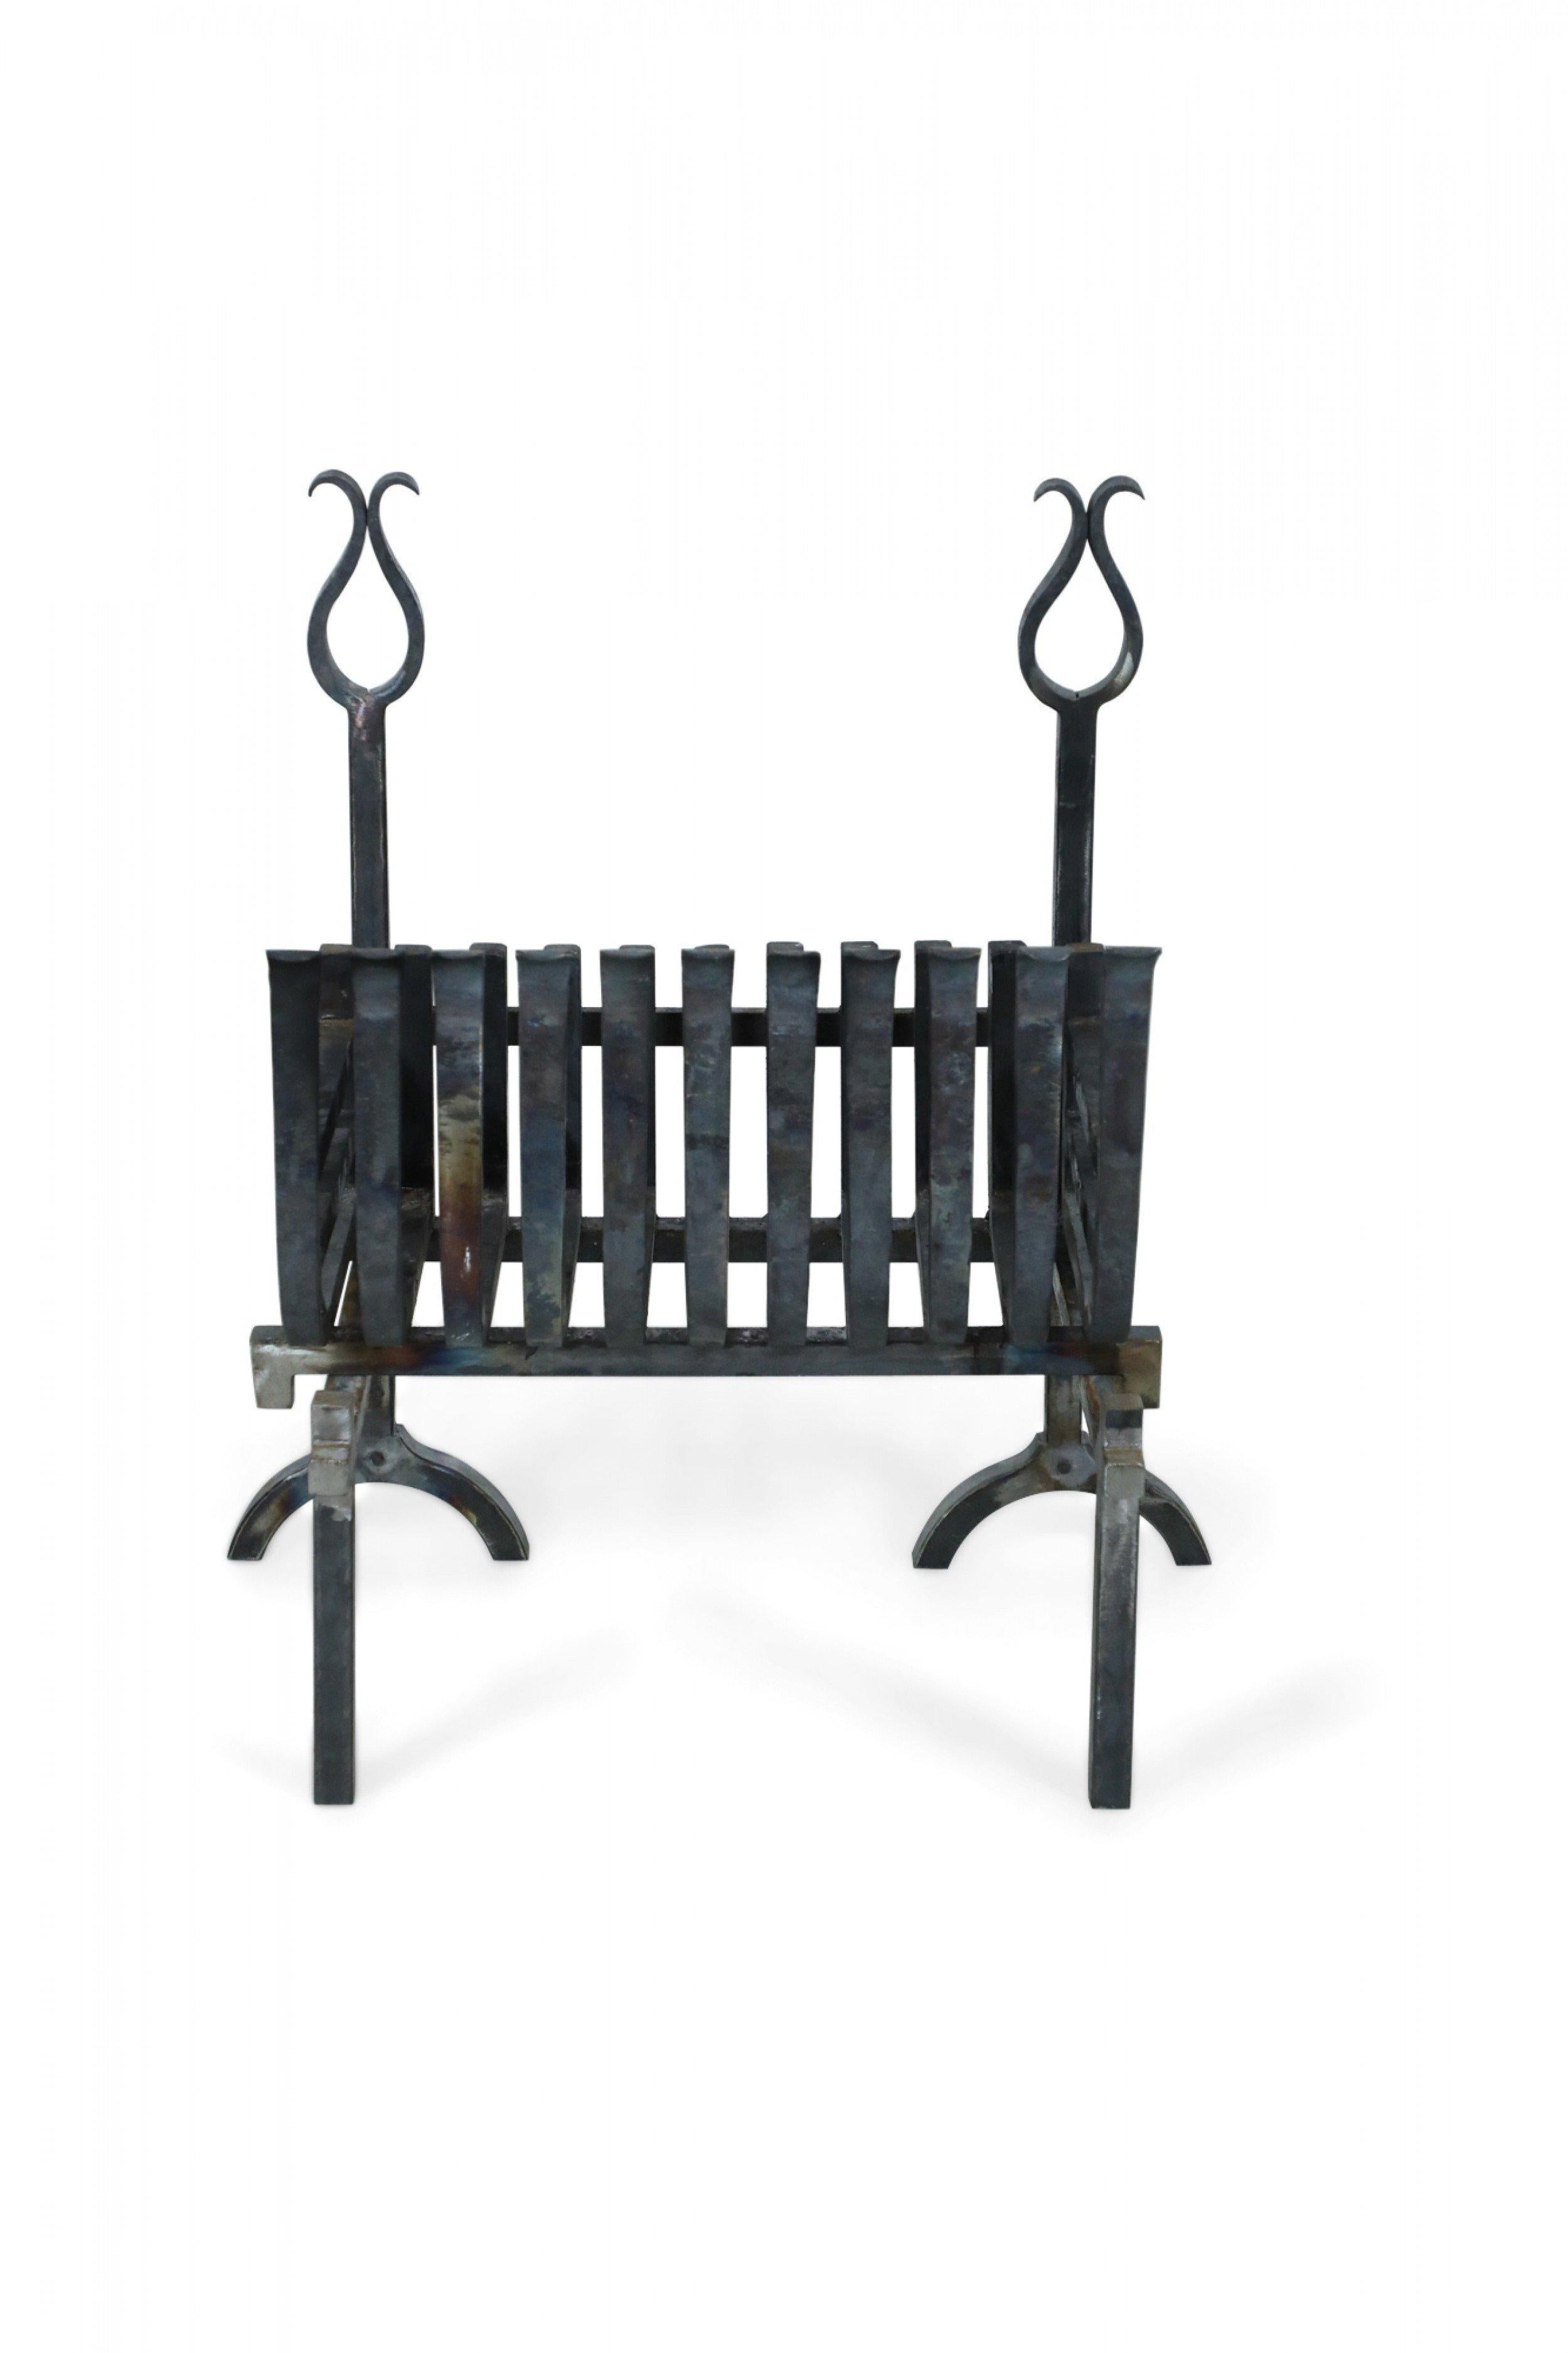 American Art Deco Iron Fire Grate with Andirons For Sale 3